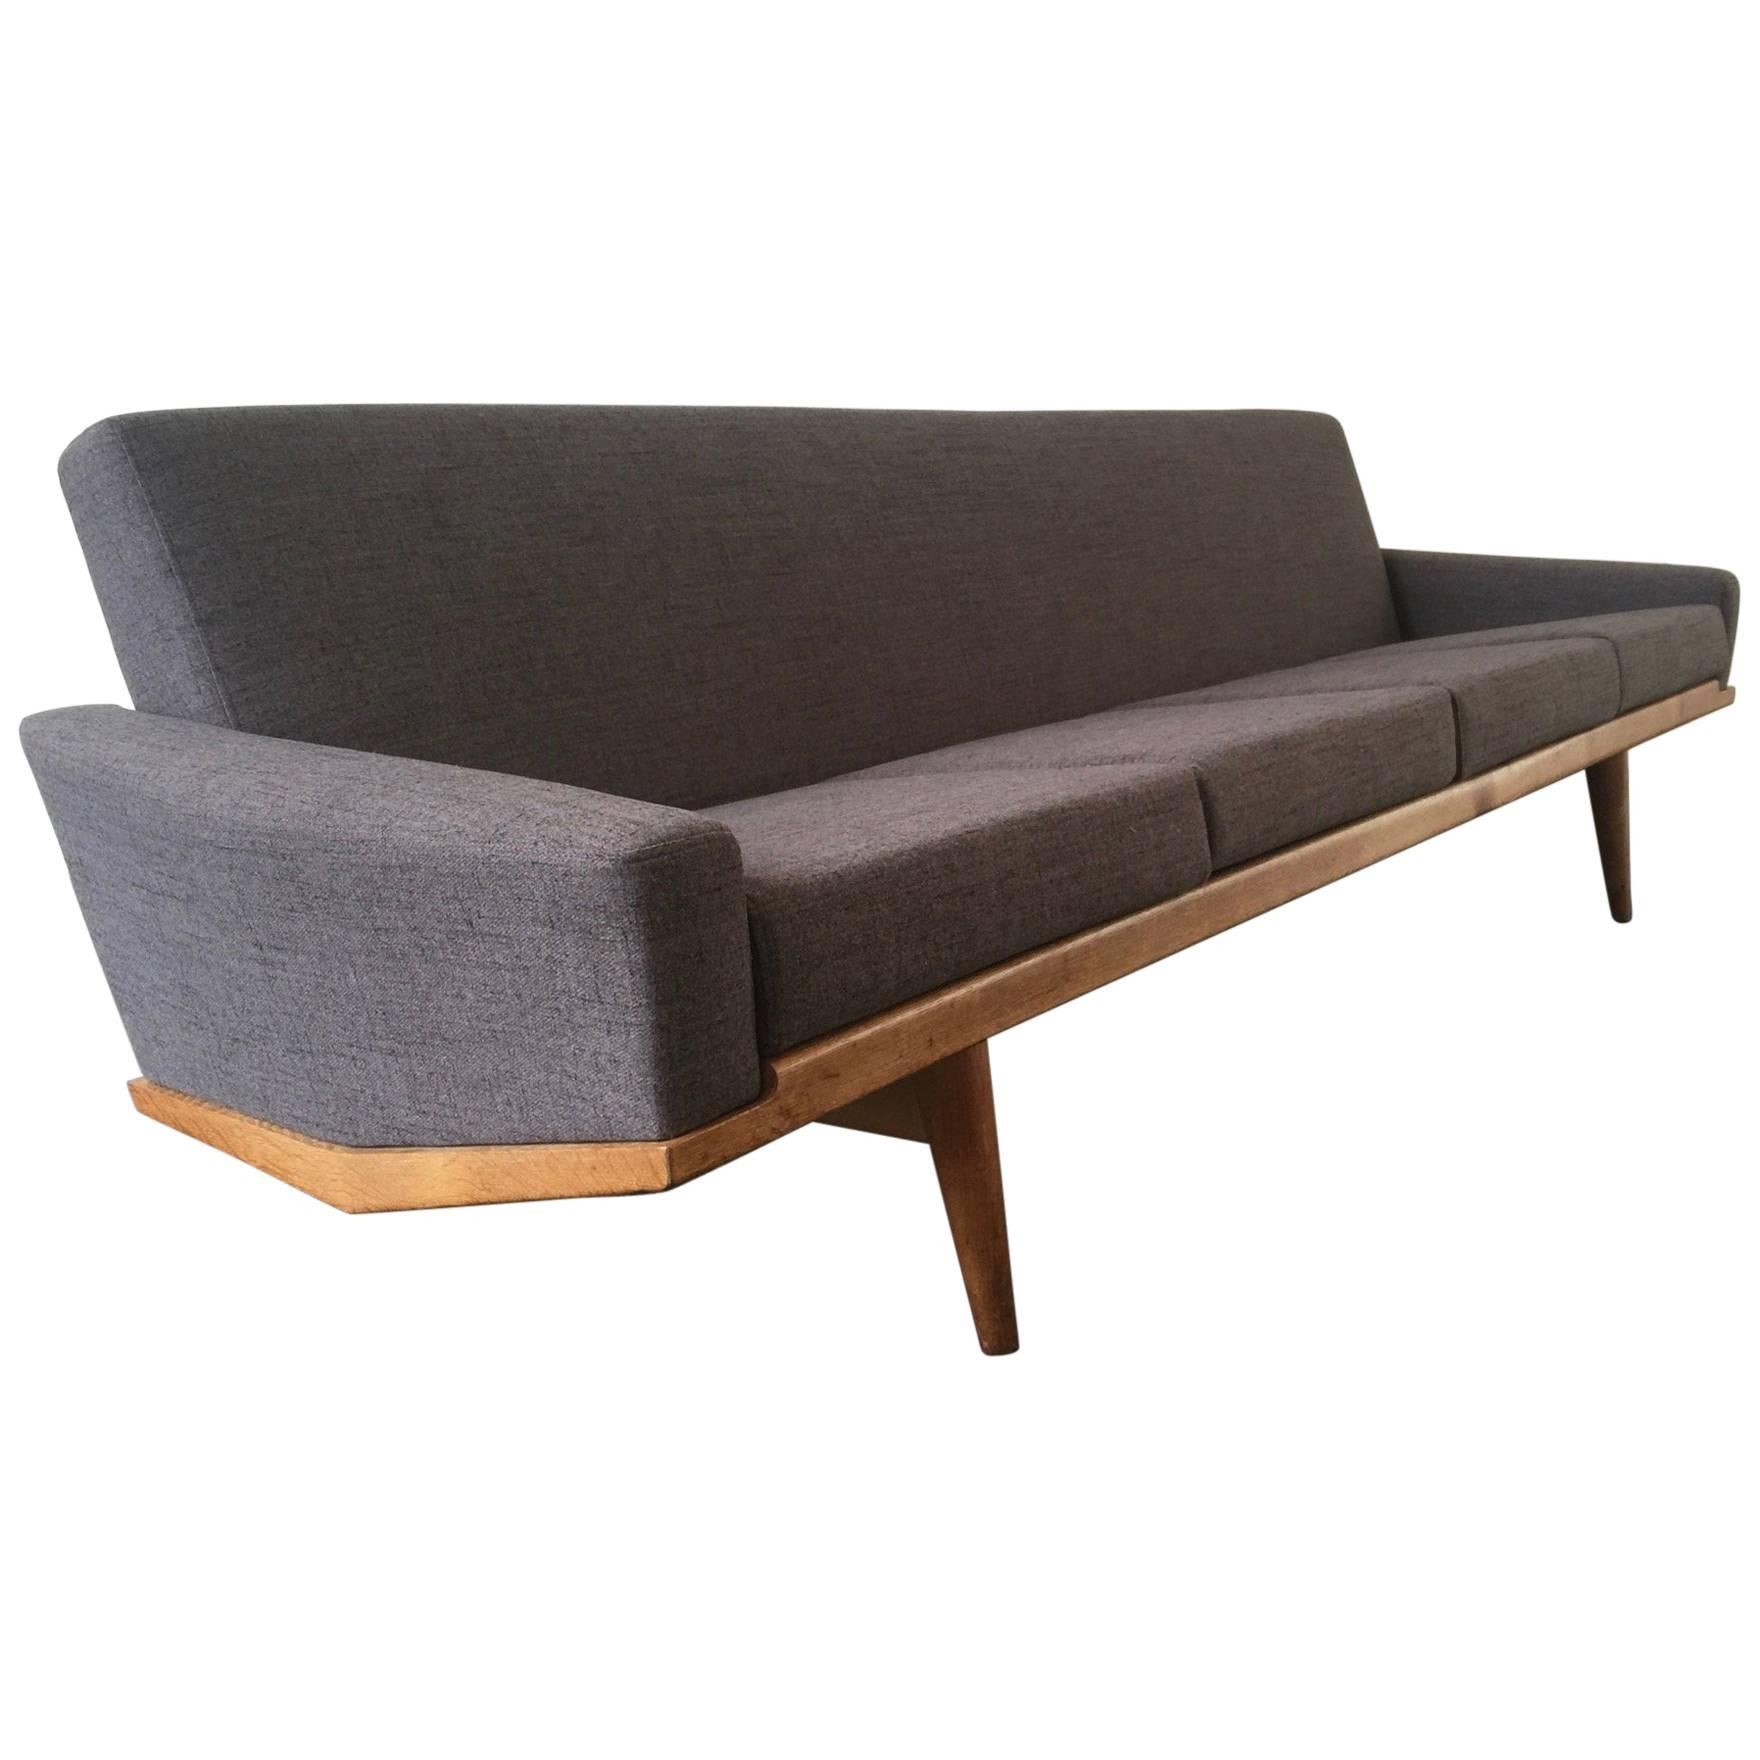 Rare Four-Seat No. 221 Sofa by H. W. Klein, Professional Re-Upholstered For Sale